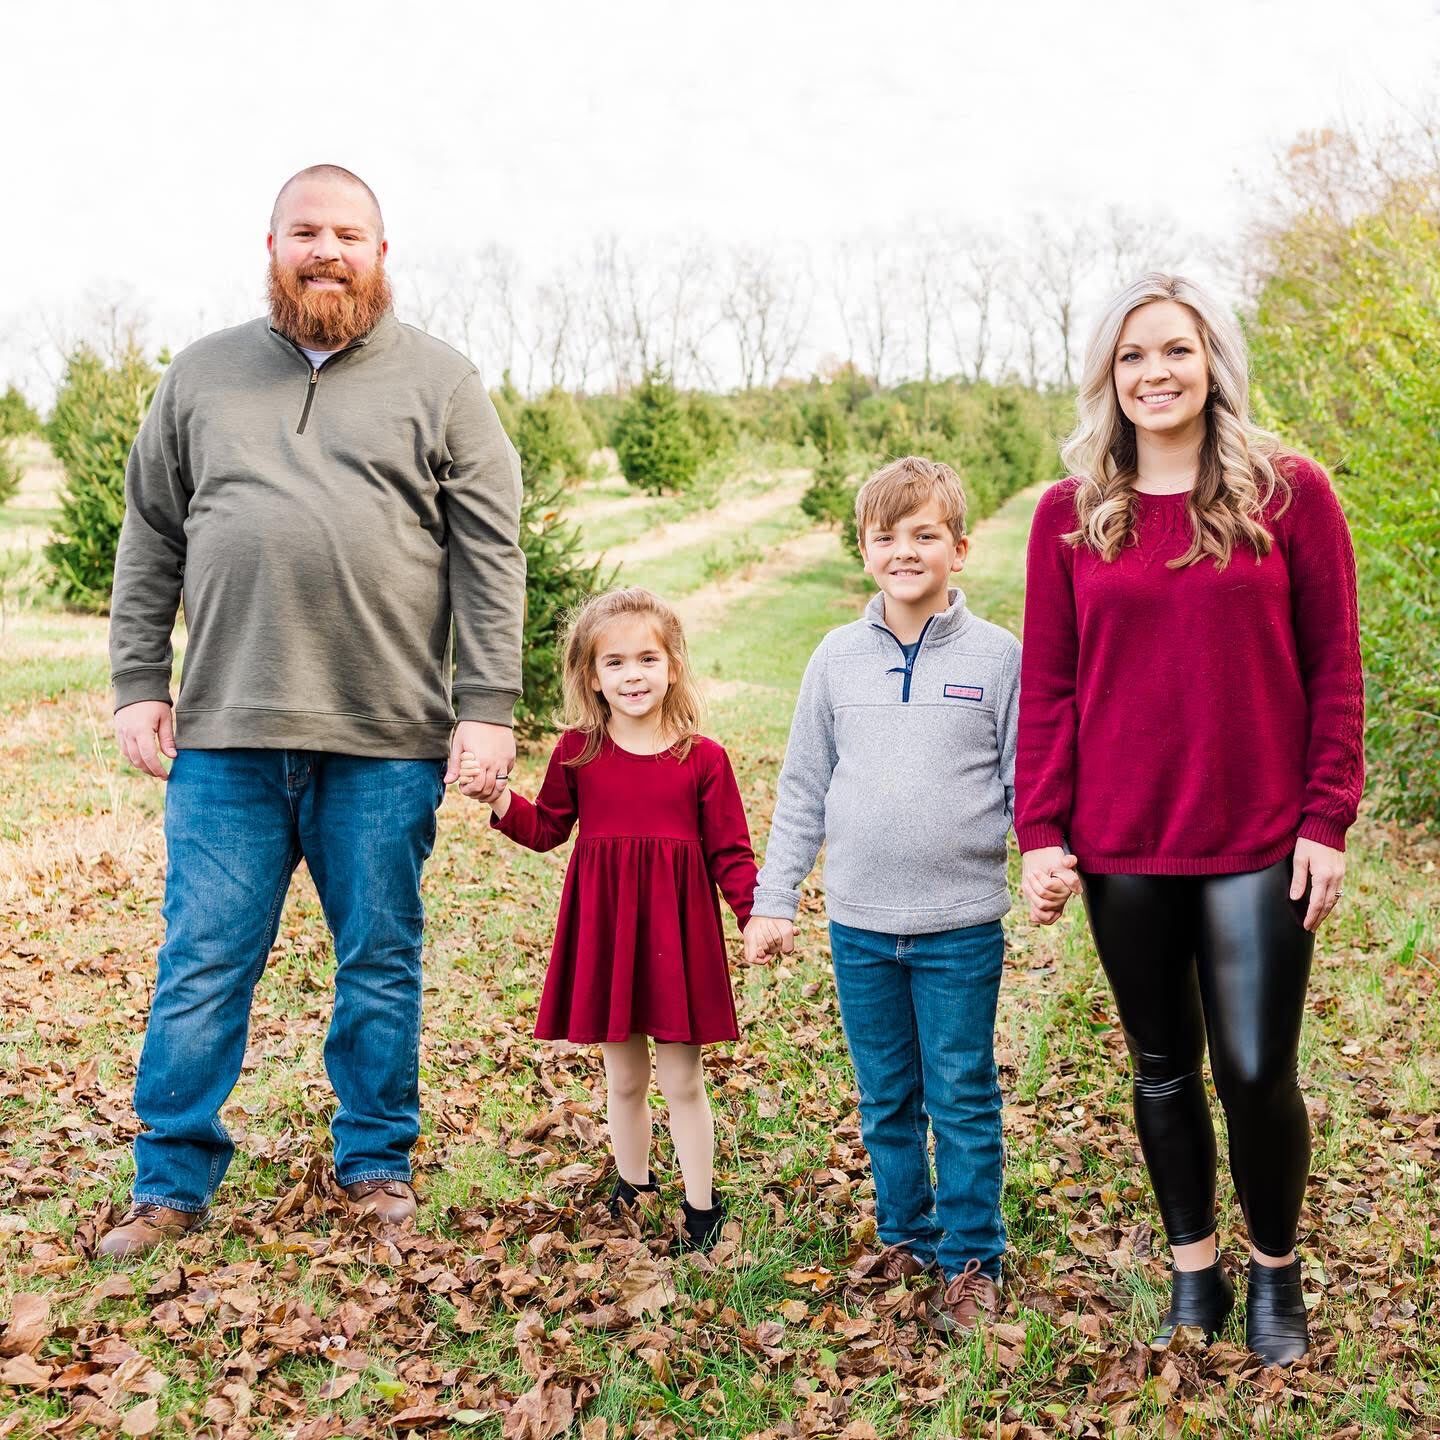 Family photo taken in an open field with evergreens in the distance. L-R: Dad with mustache and beard, jeans and long sleeved shirt holds hand of young girl next to him. She has blond hair and is wearing a red dress, holding the hand of her older brother 